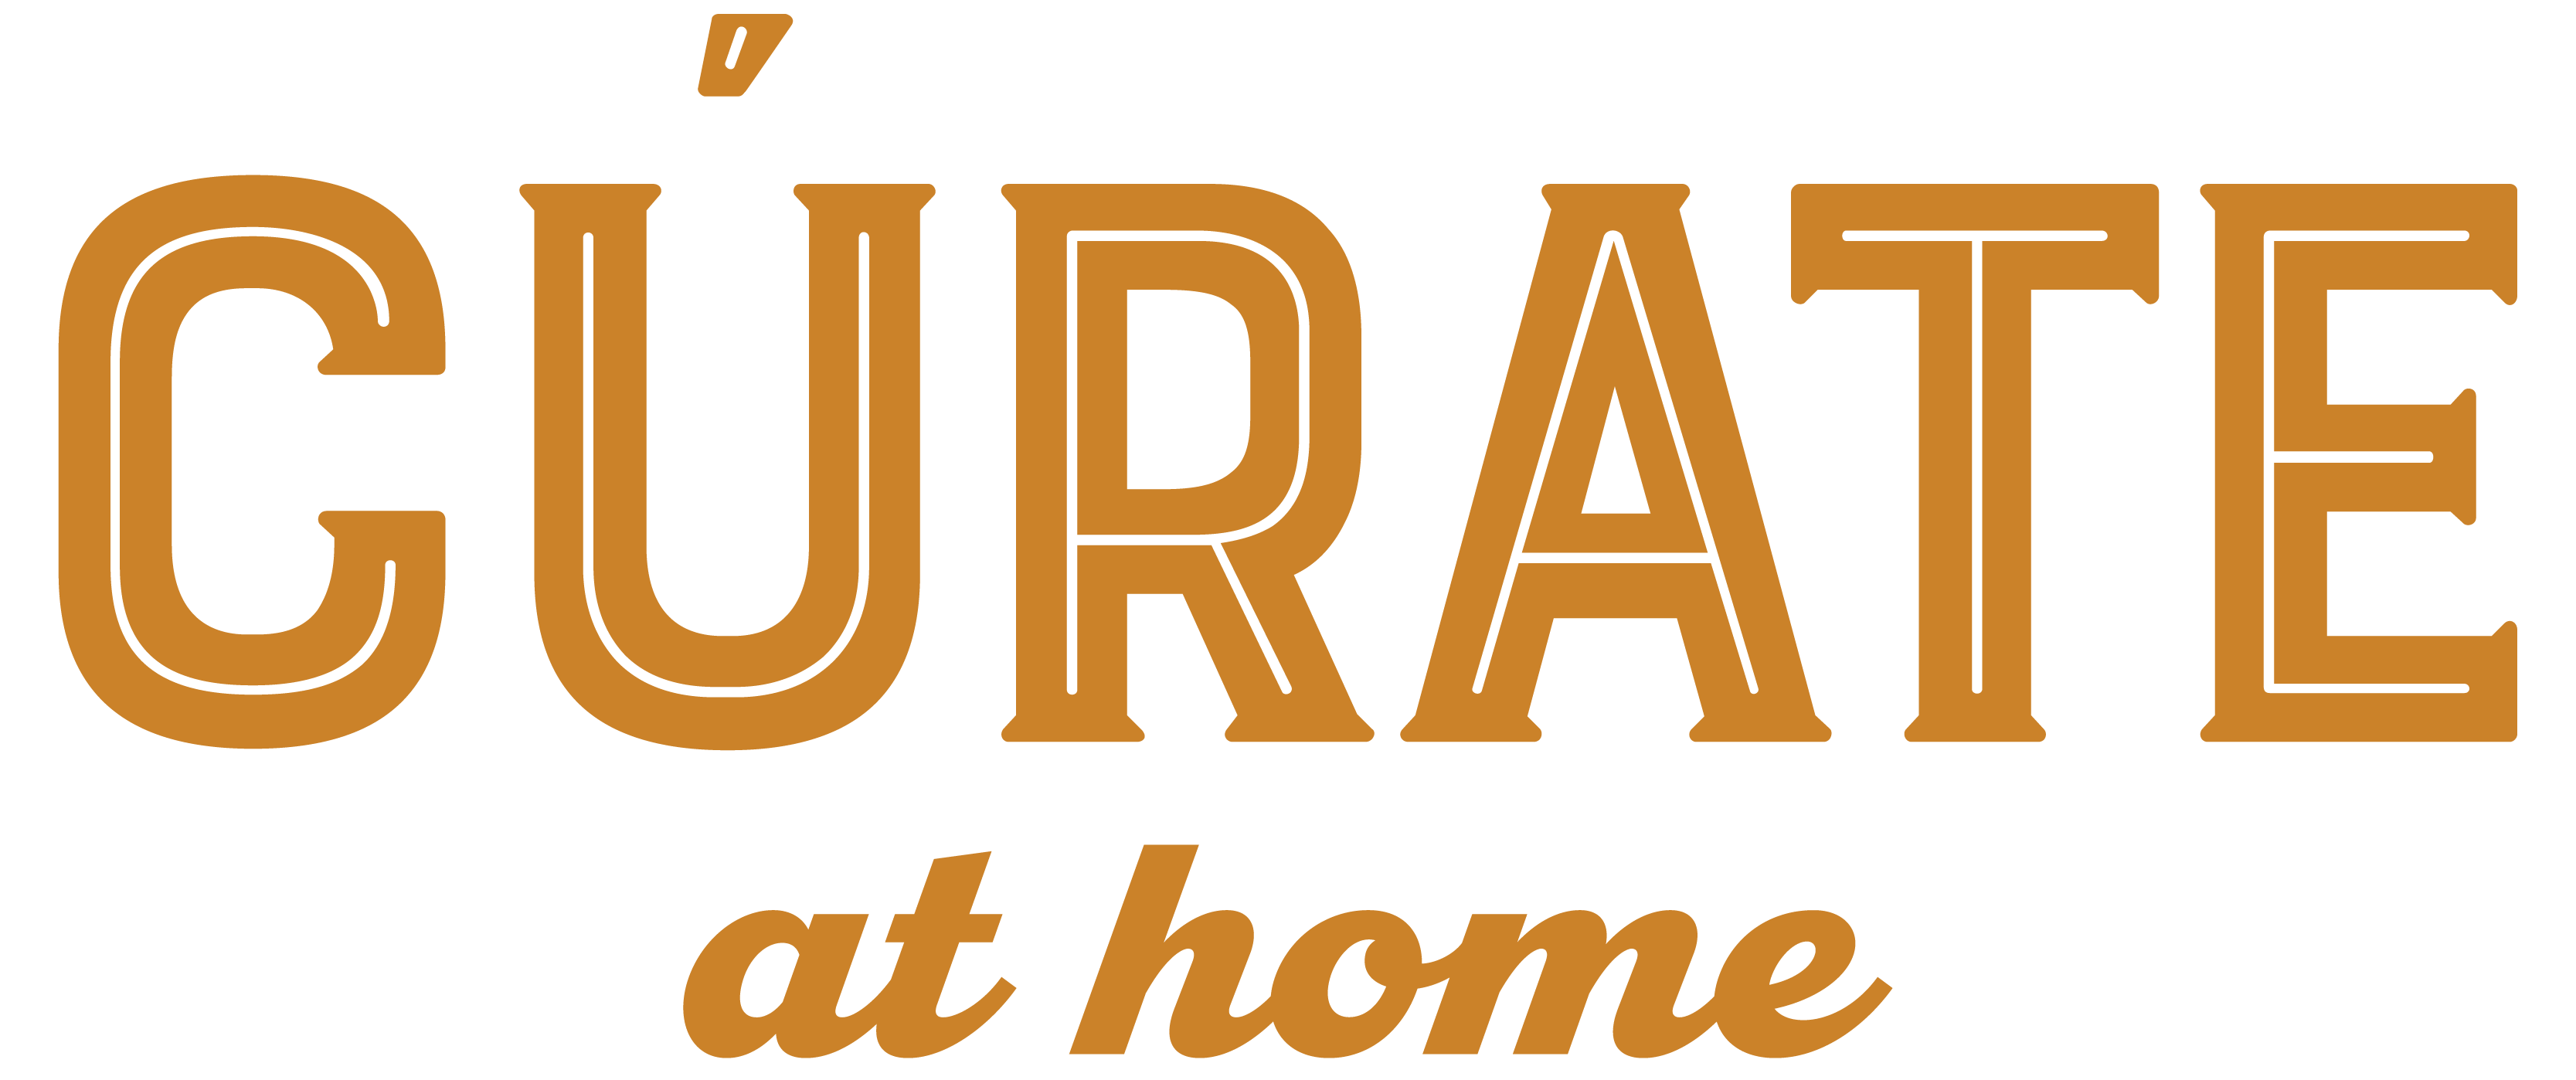 Curate AtHome